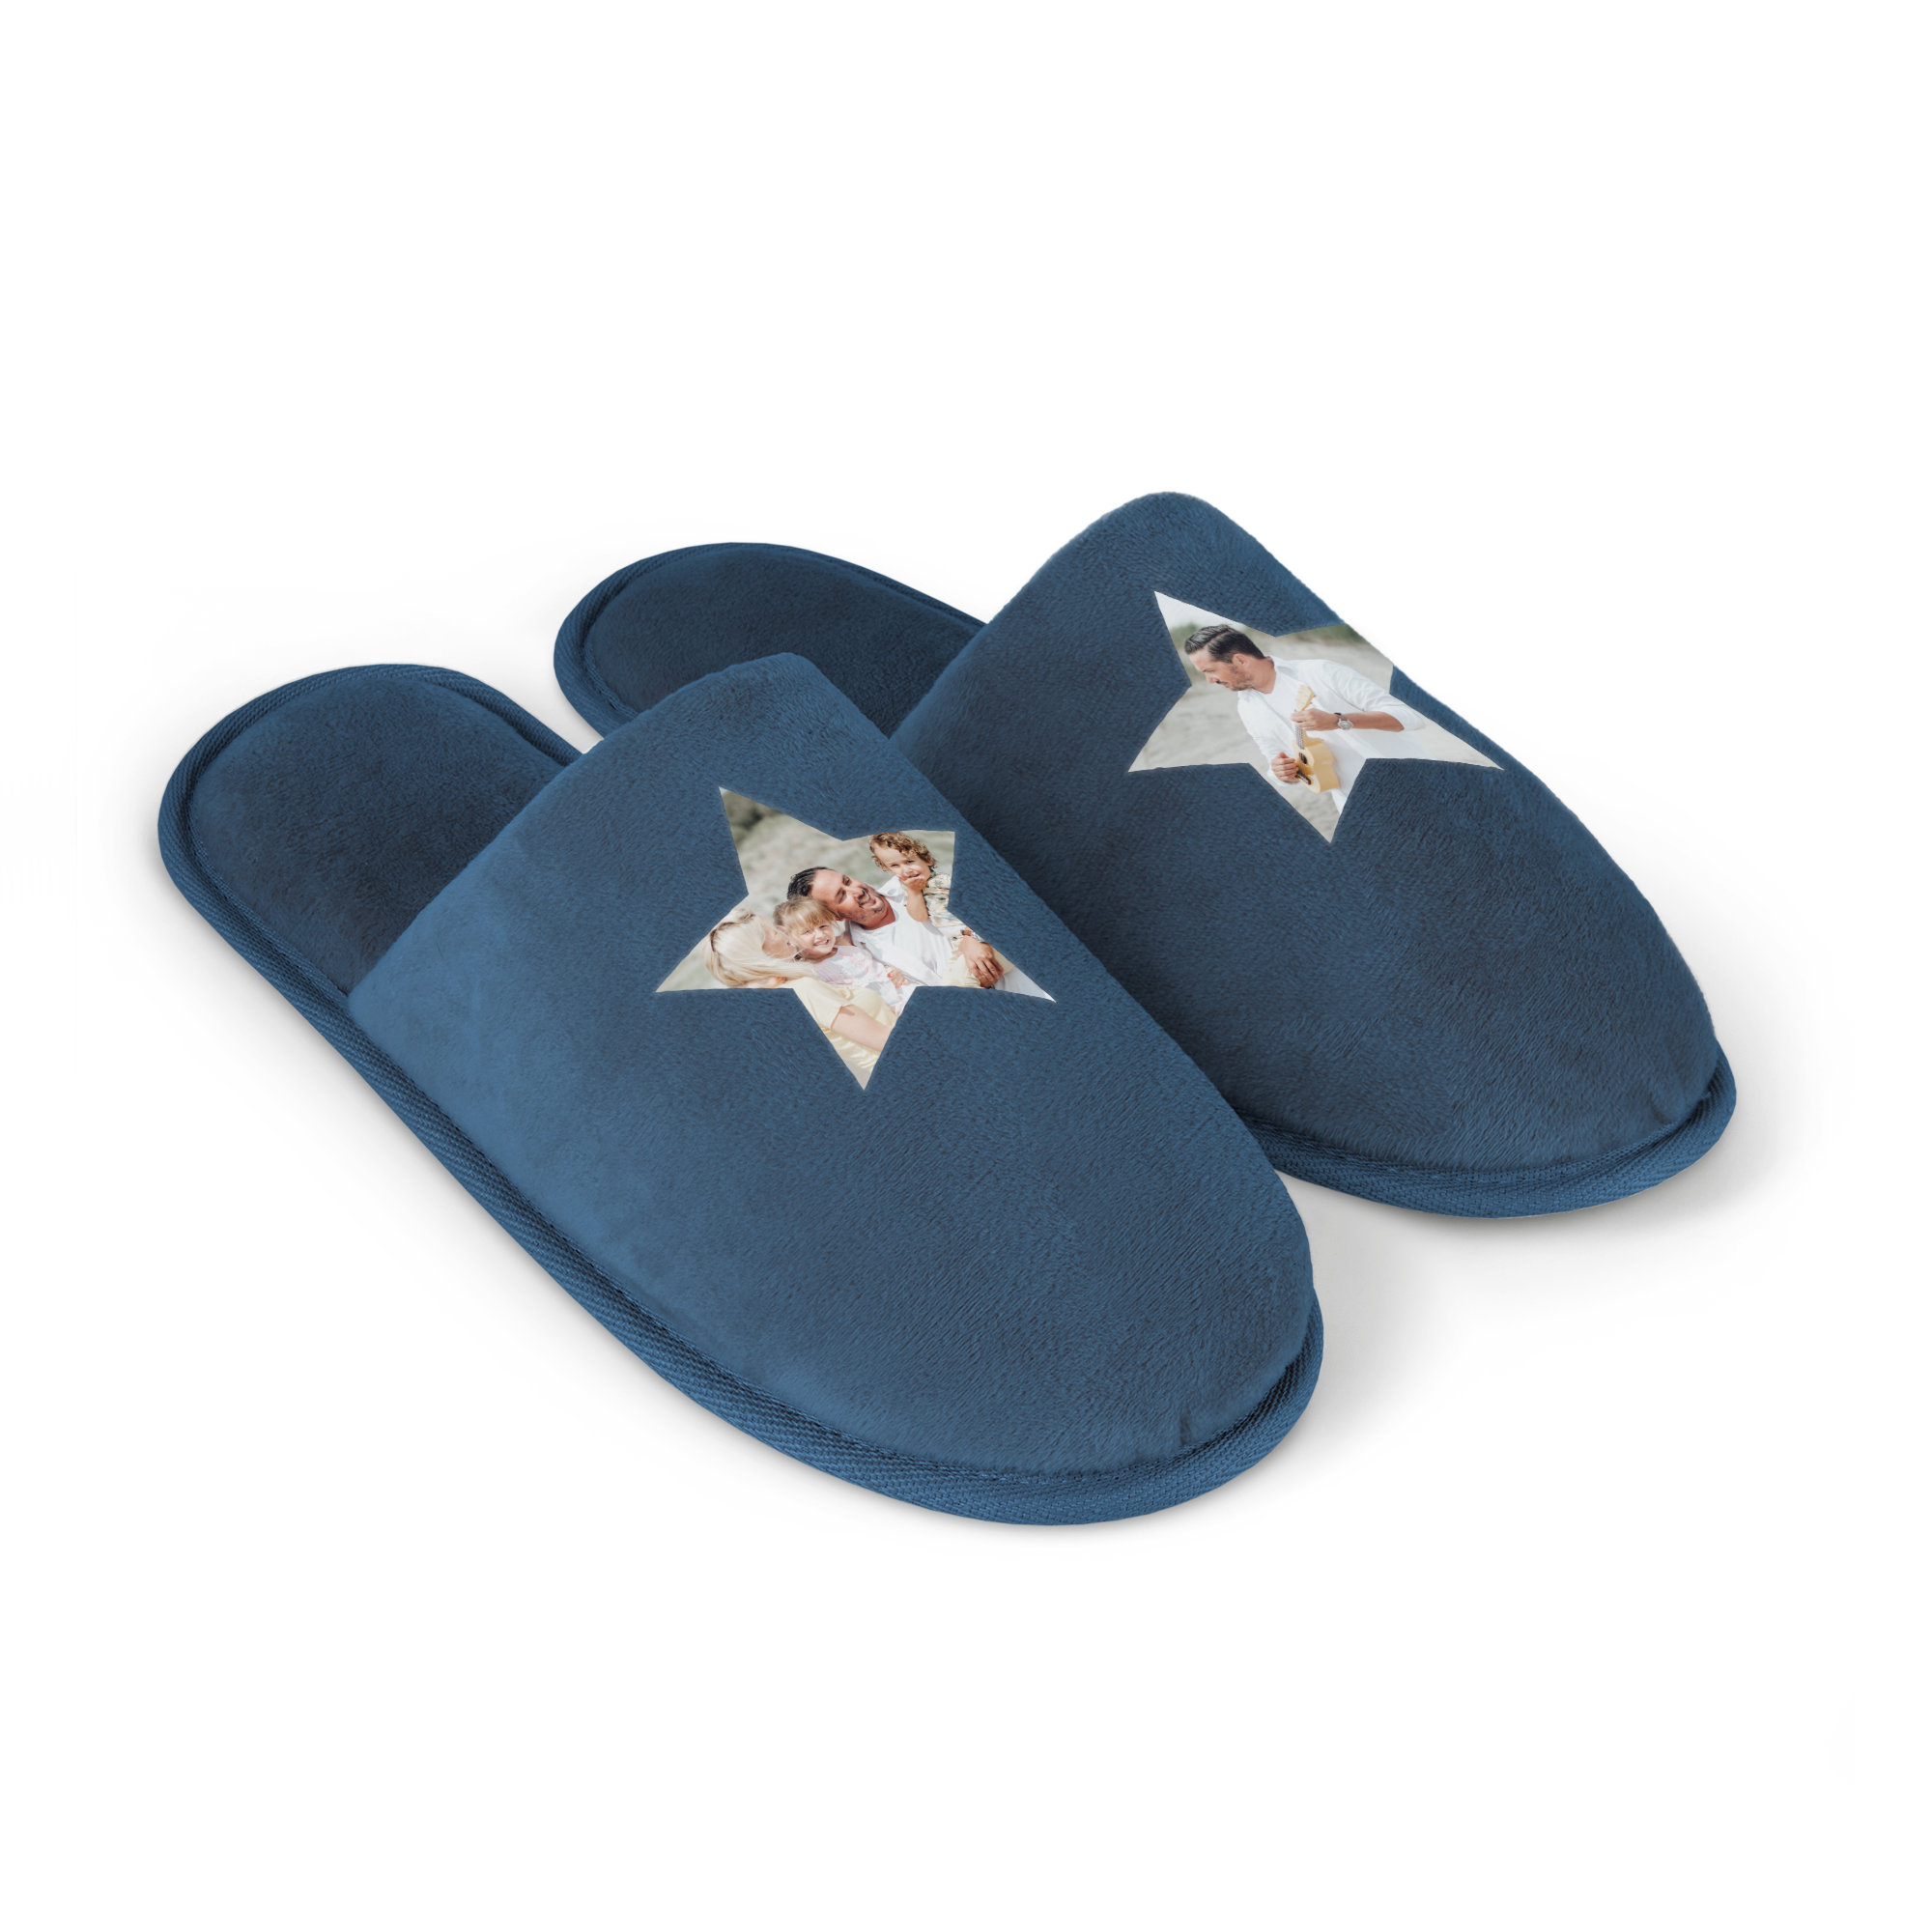 Personalised slippers - Blue - Size 39 - 42